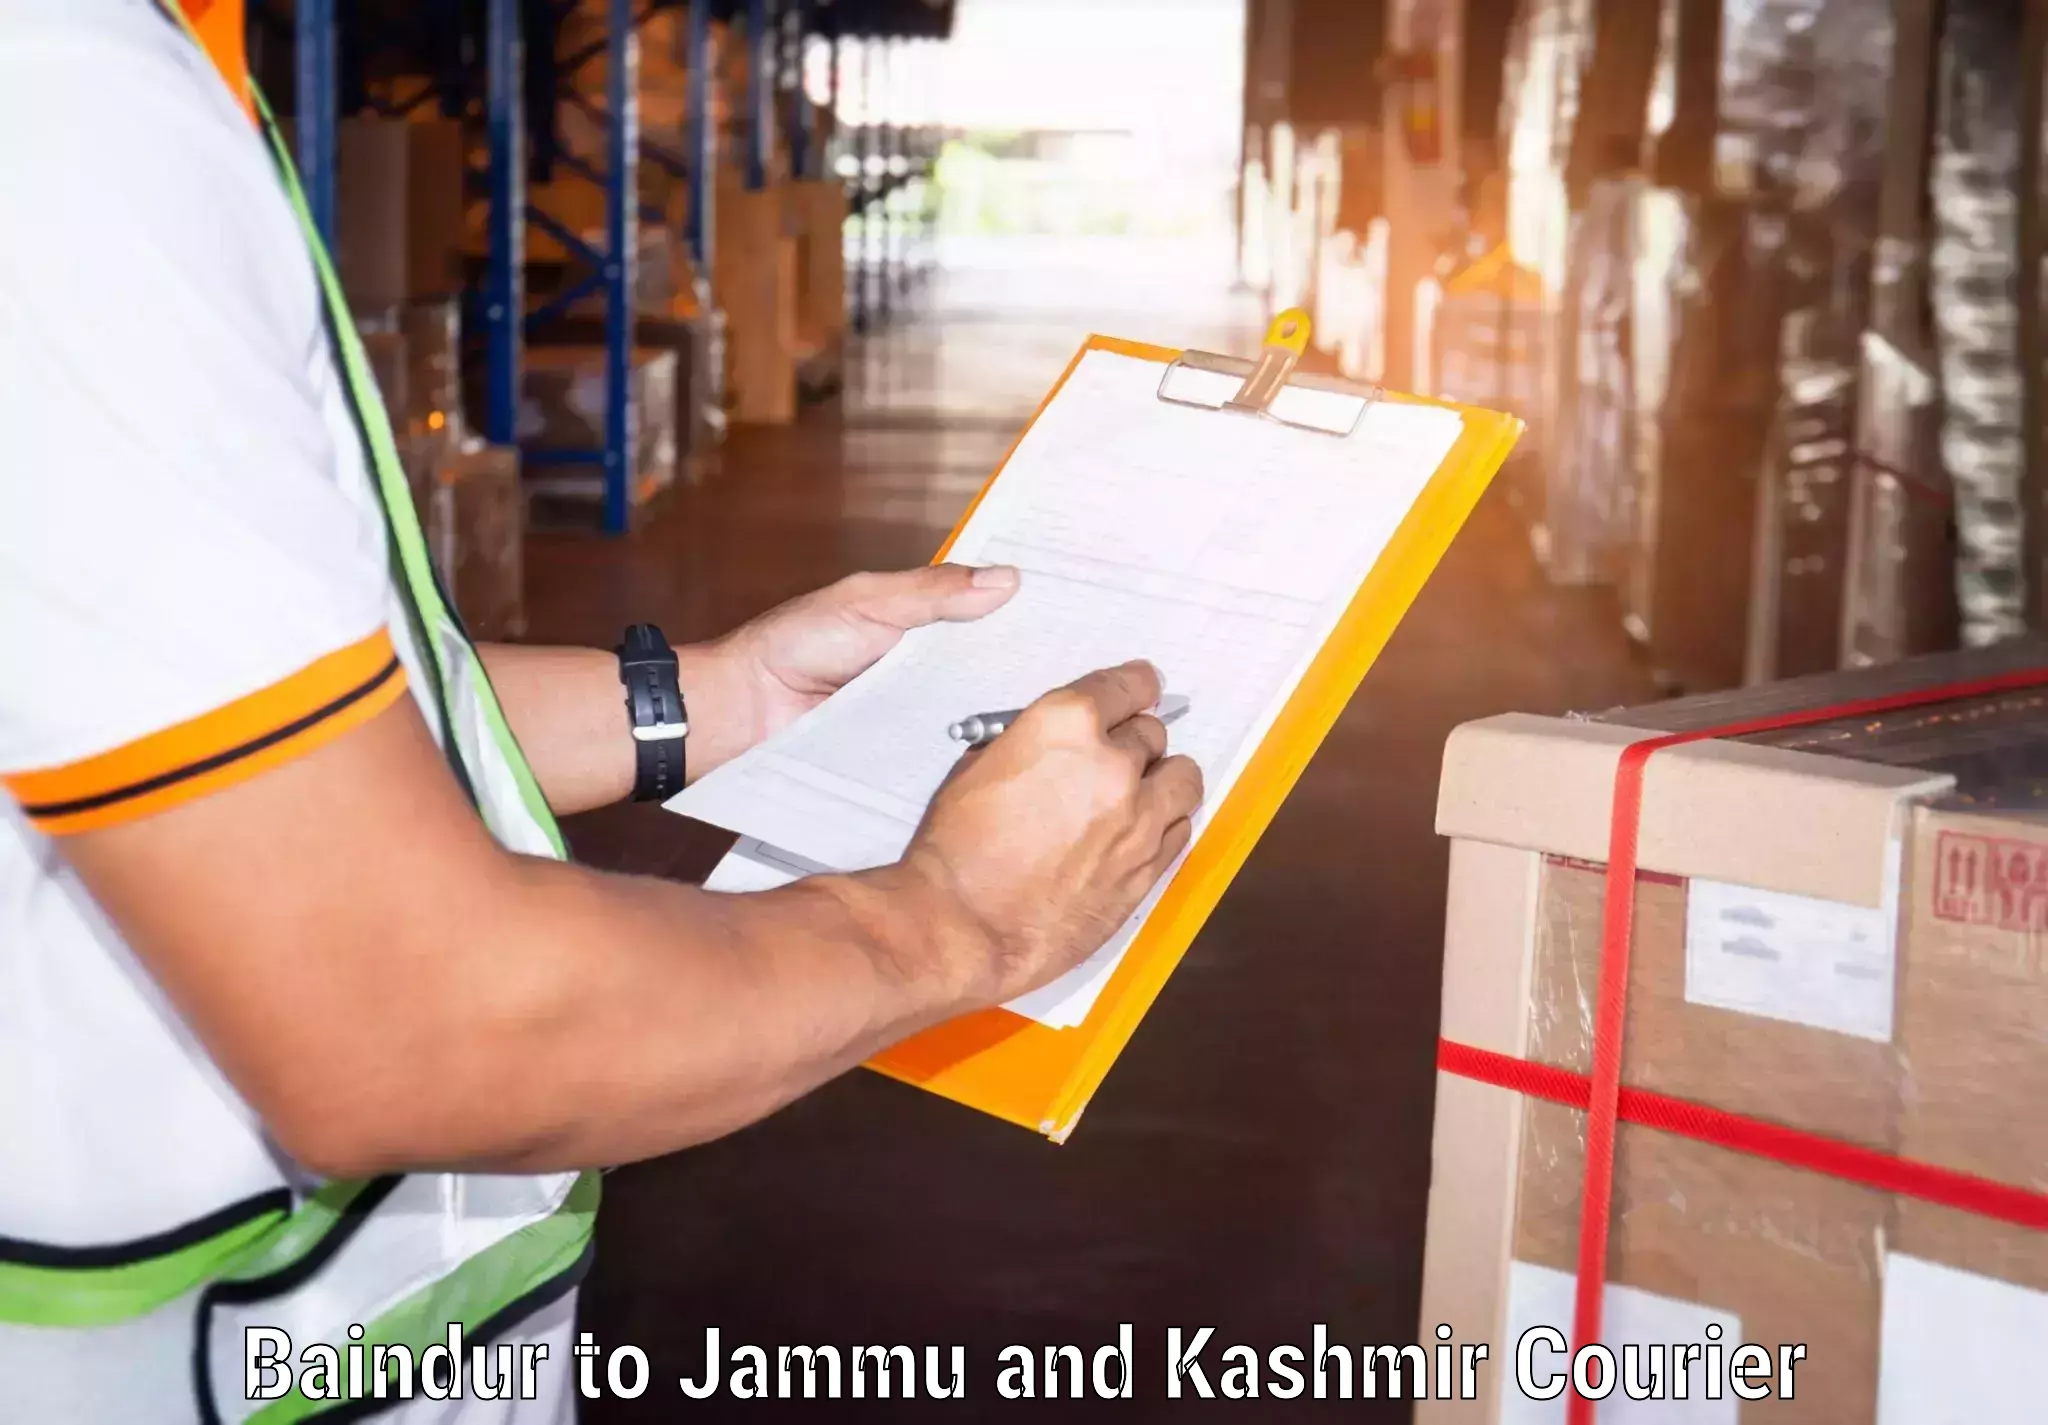 Personal courier services in Baindur to Jammu and Kashmir